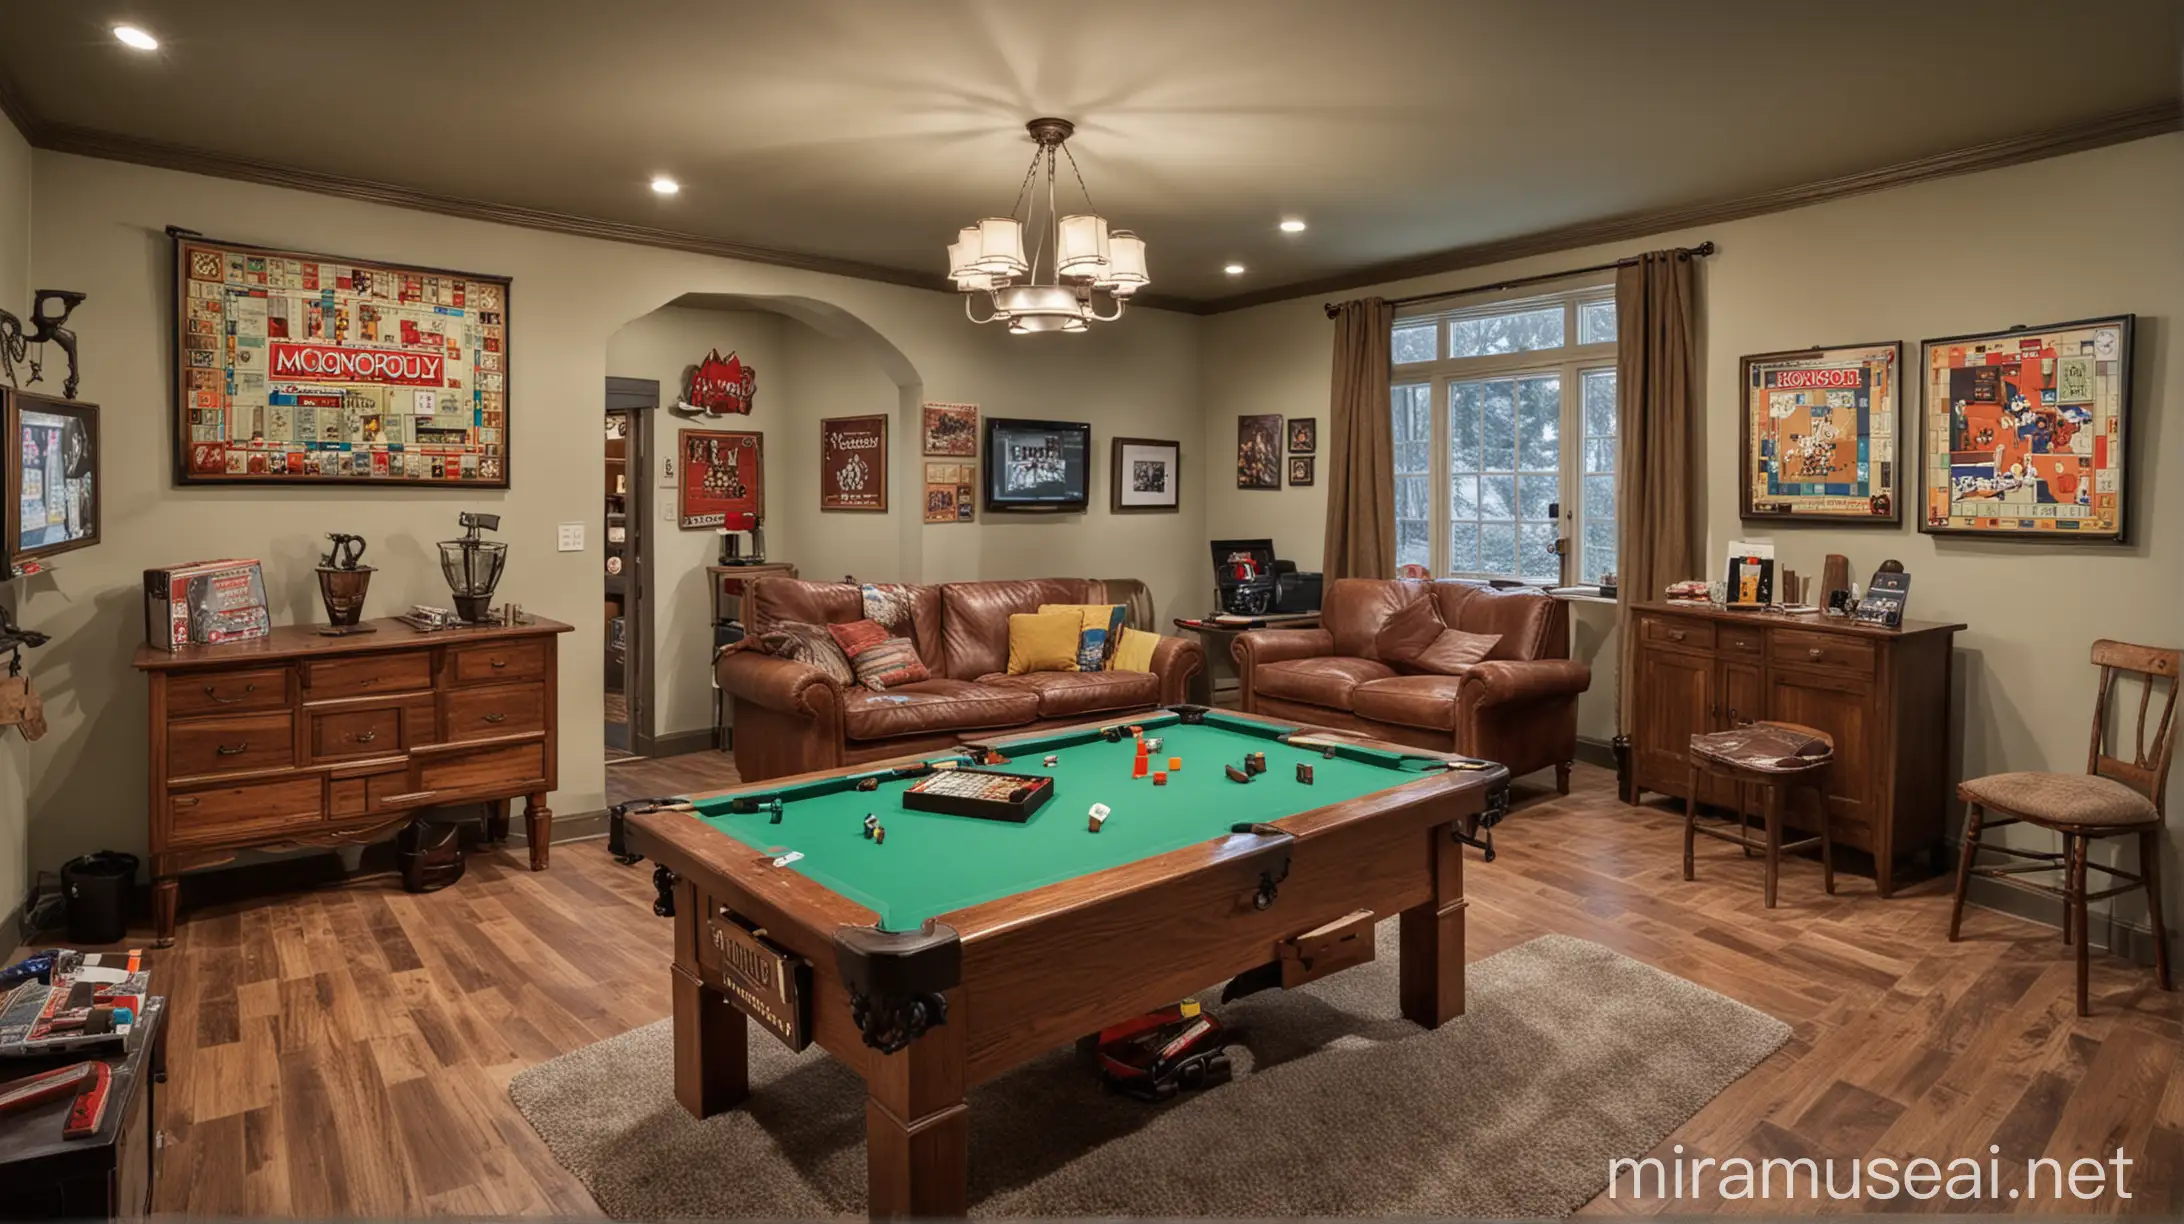 Real
A game room with different games and seat,a different kind of family room,coziness, intrigue,mystery,want to try it out,video games, monopoly,scrabble, family games
